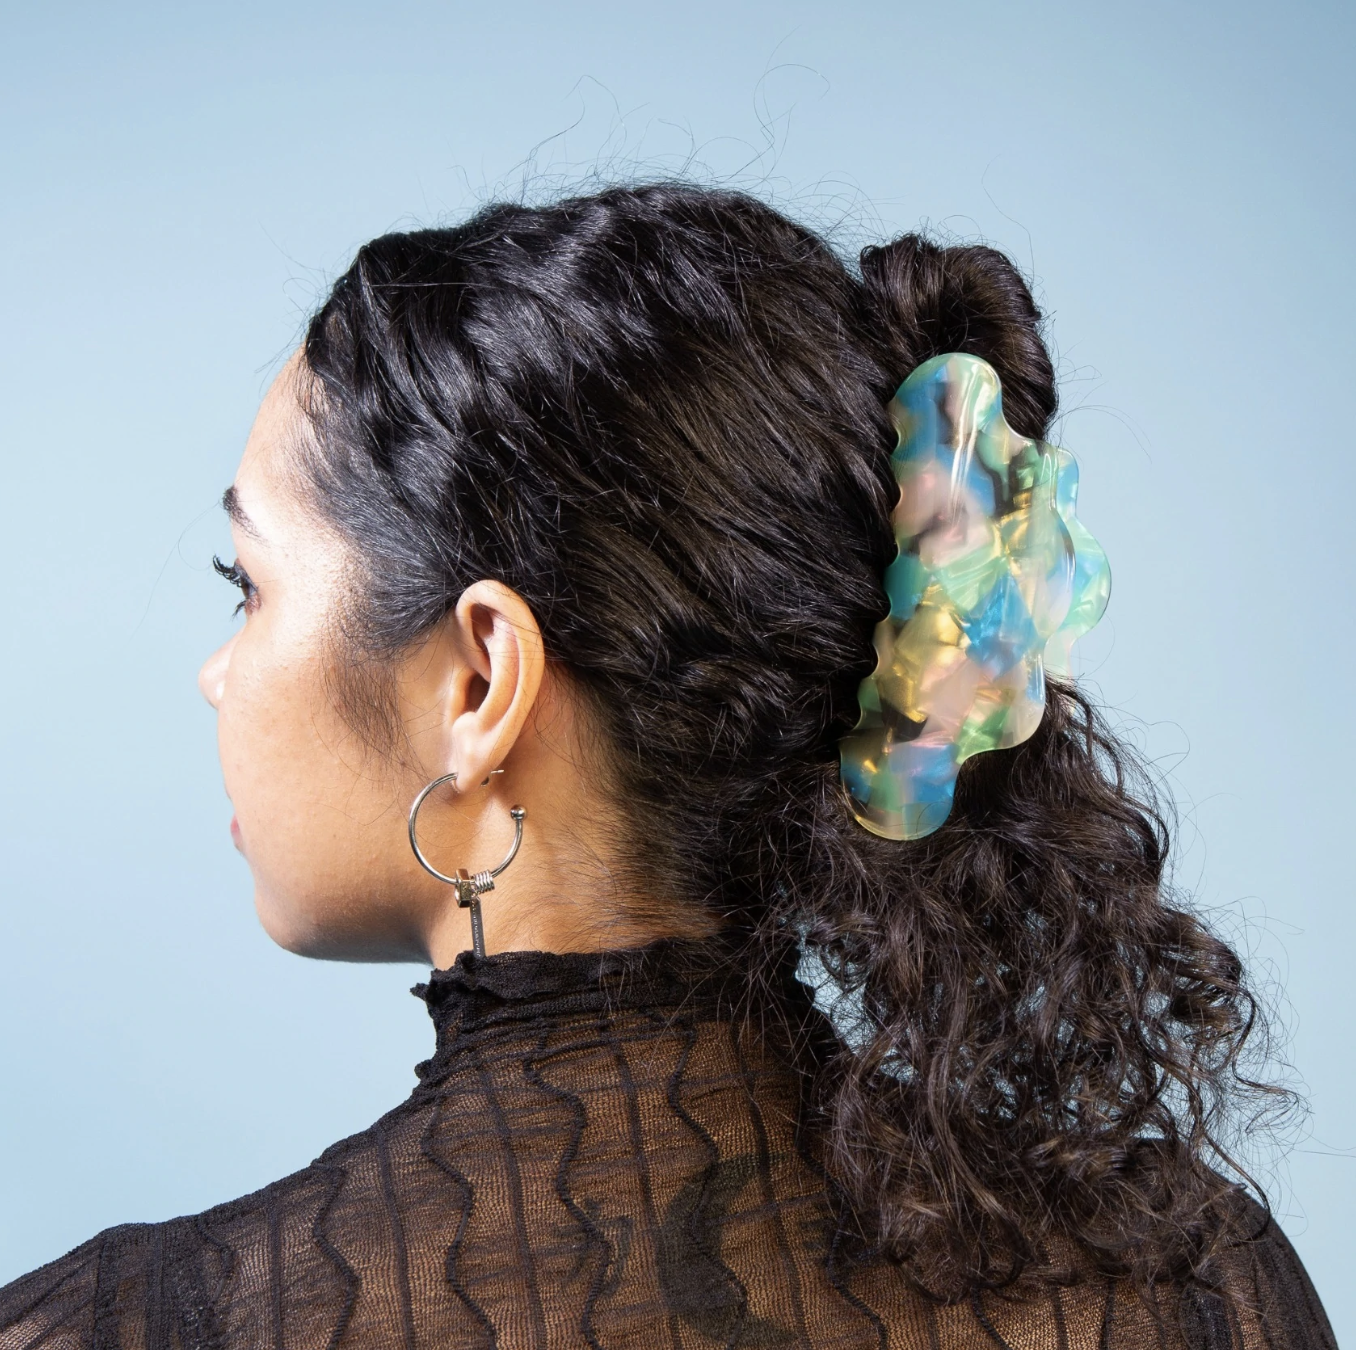 Cloud shaped hairclip holding up a model&#x27;s curly hair.